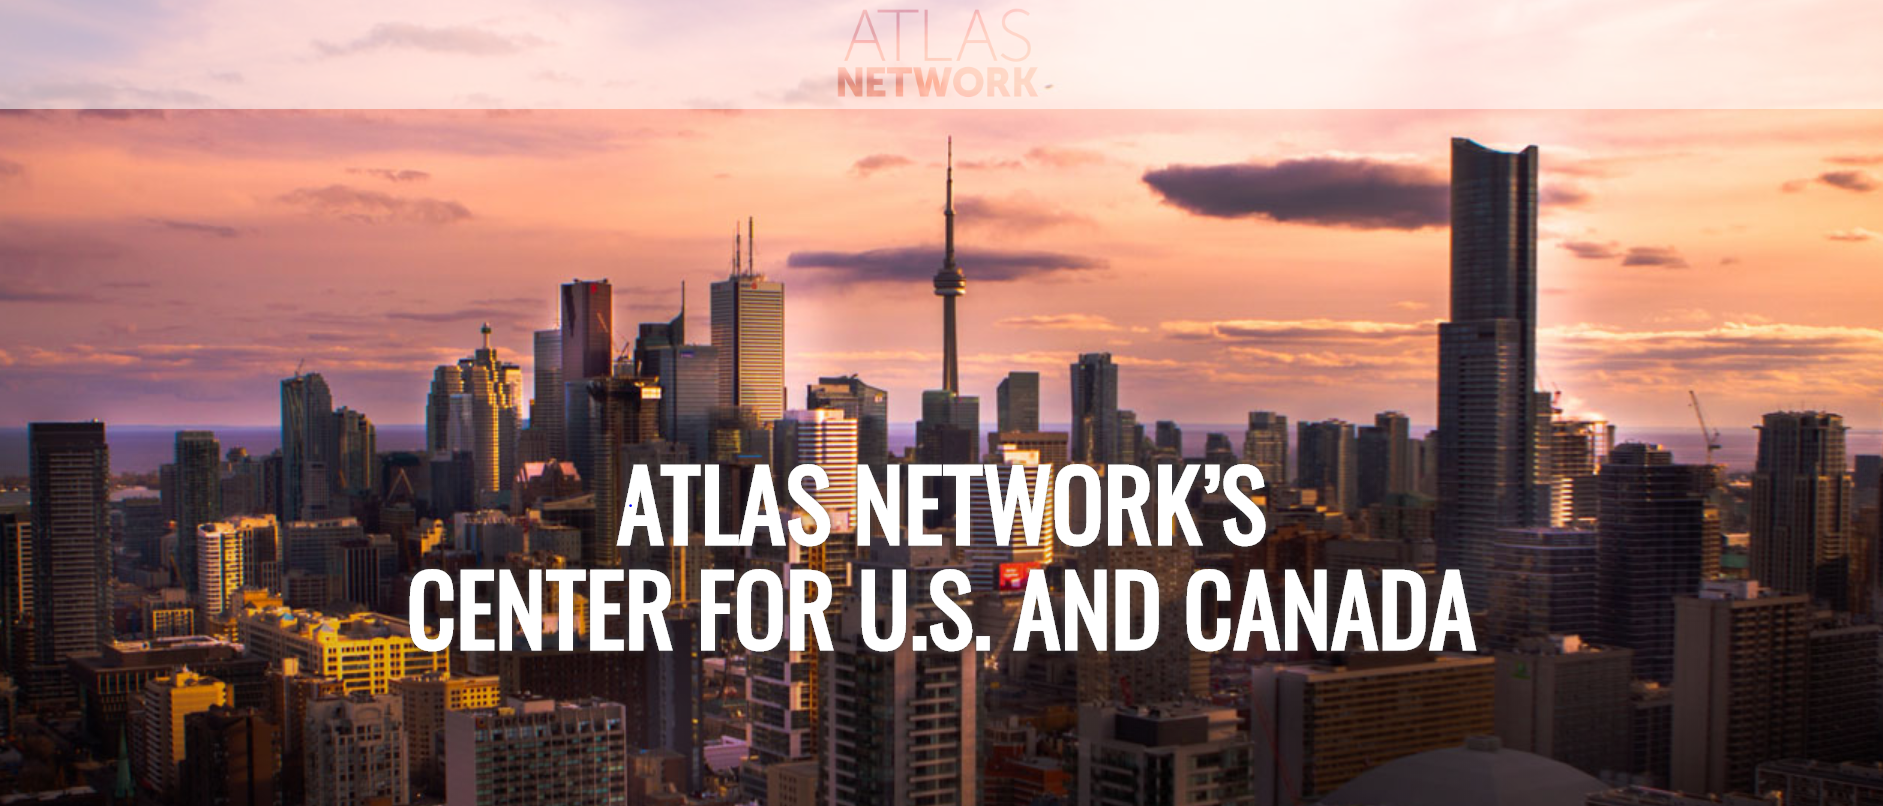 Atlas Network’s new Center for U.S. and Canada works with local civil society organizations on both sides of the border to create positive perceptions of the role of free enterprise and individual liberty in advancing a freer, more prosperous world for all.